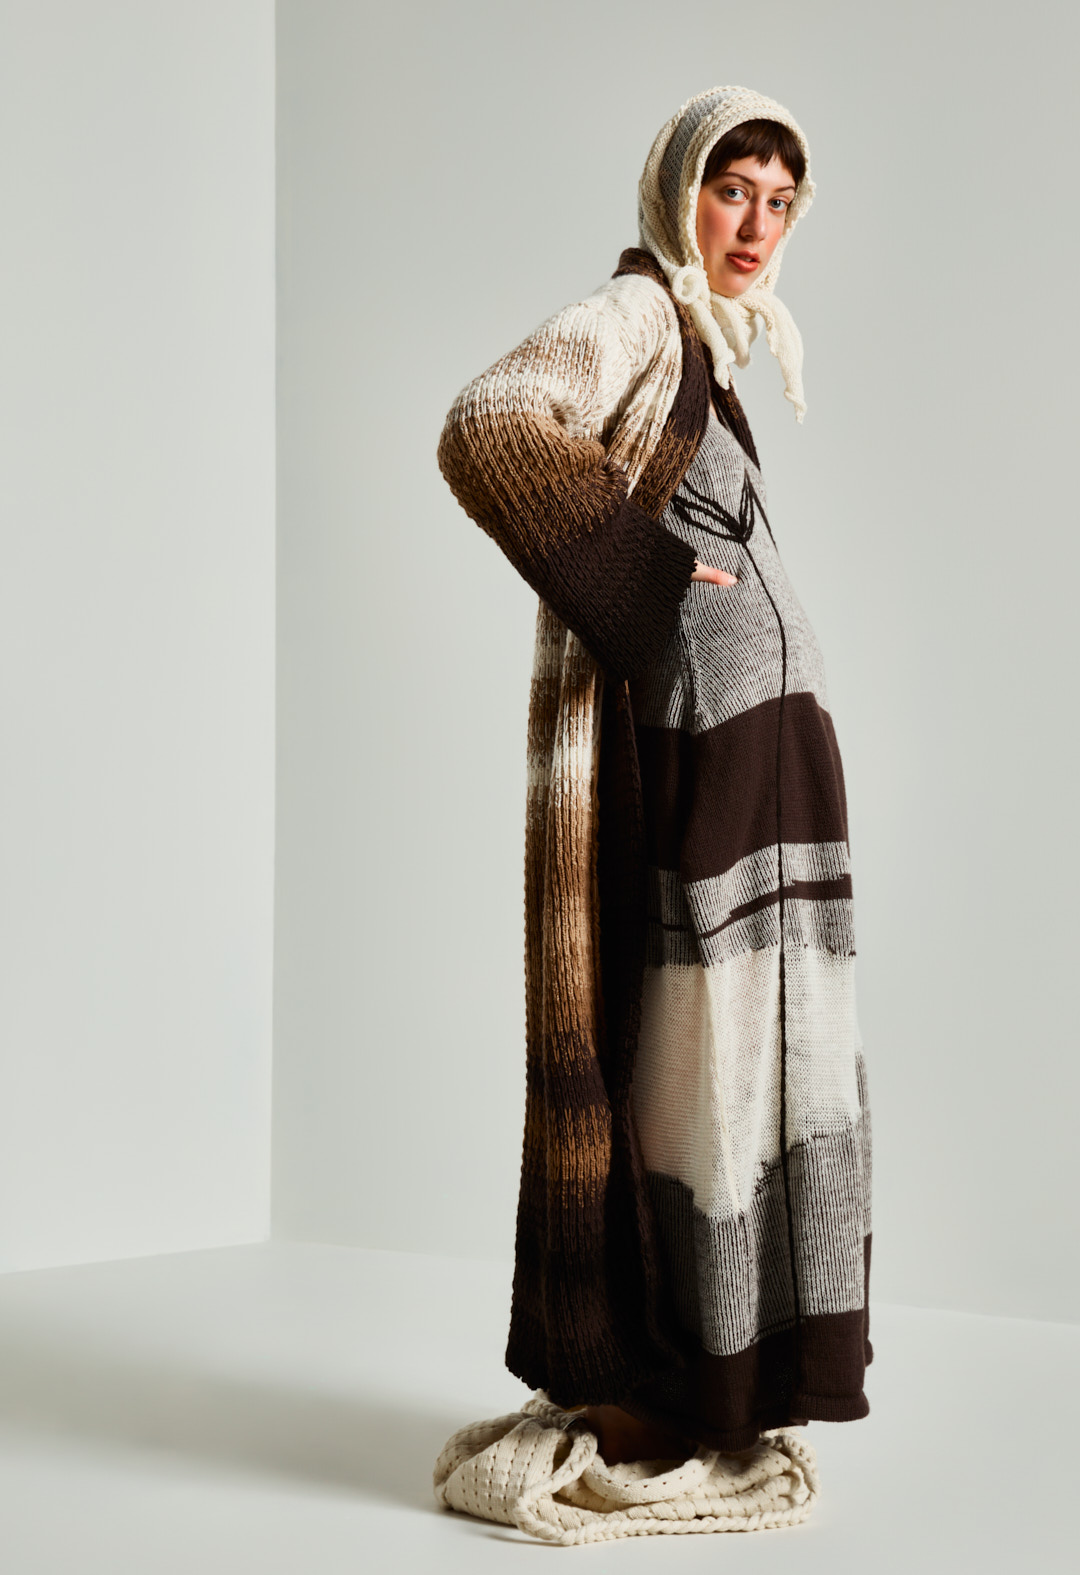 A full-length side-view shot of a model posing in a striped textured cardigan, made of organic certified merino over a midi dress, with a messenger bag and a handkerchief head covering. She is posing with her hand on her hip.